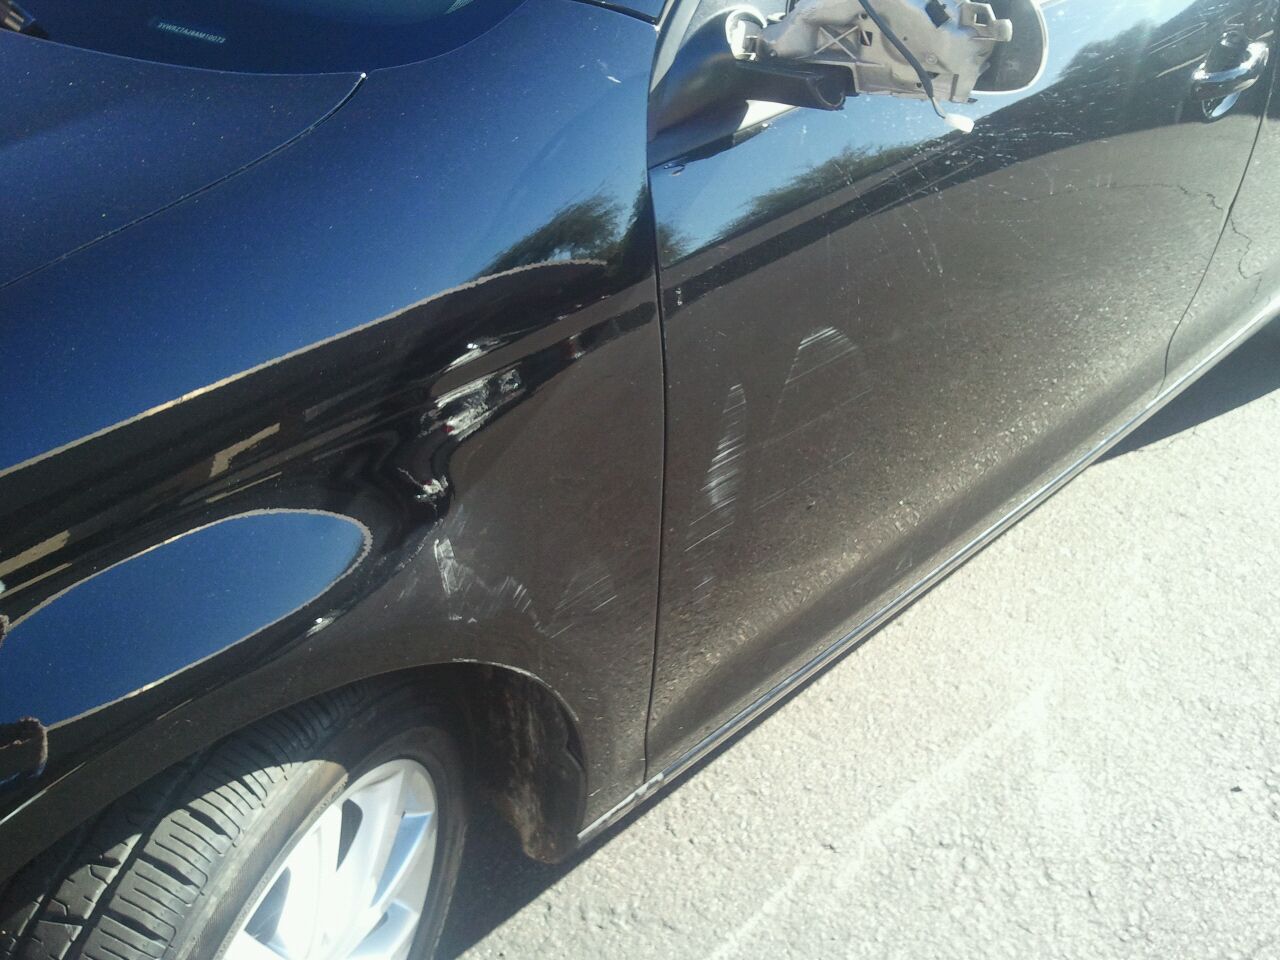 Damage to my car and mirror gone